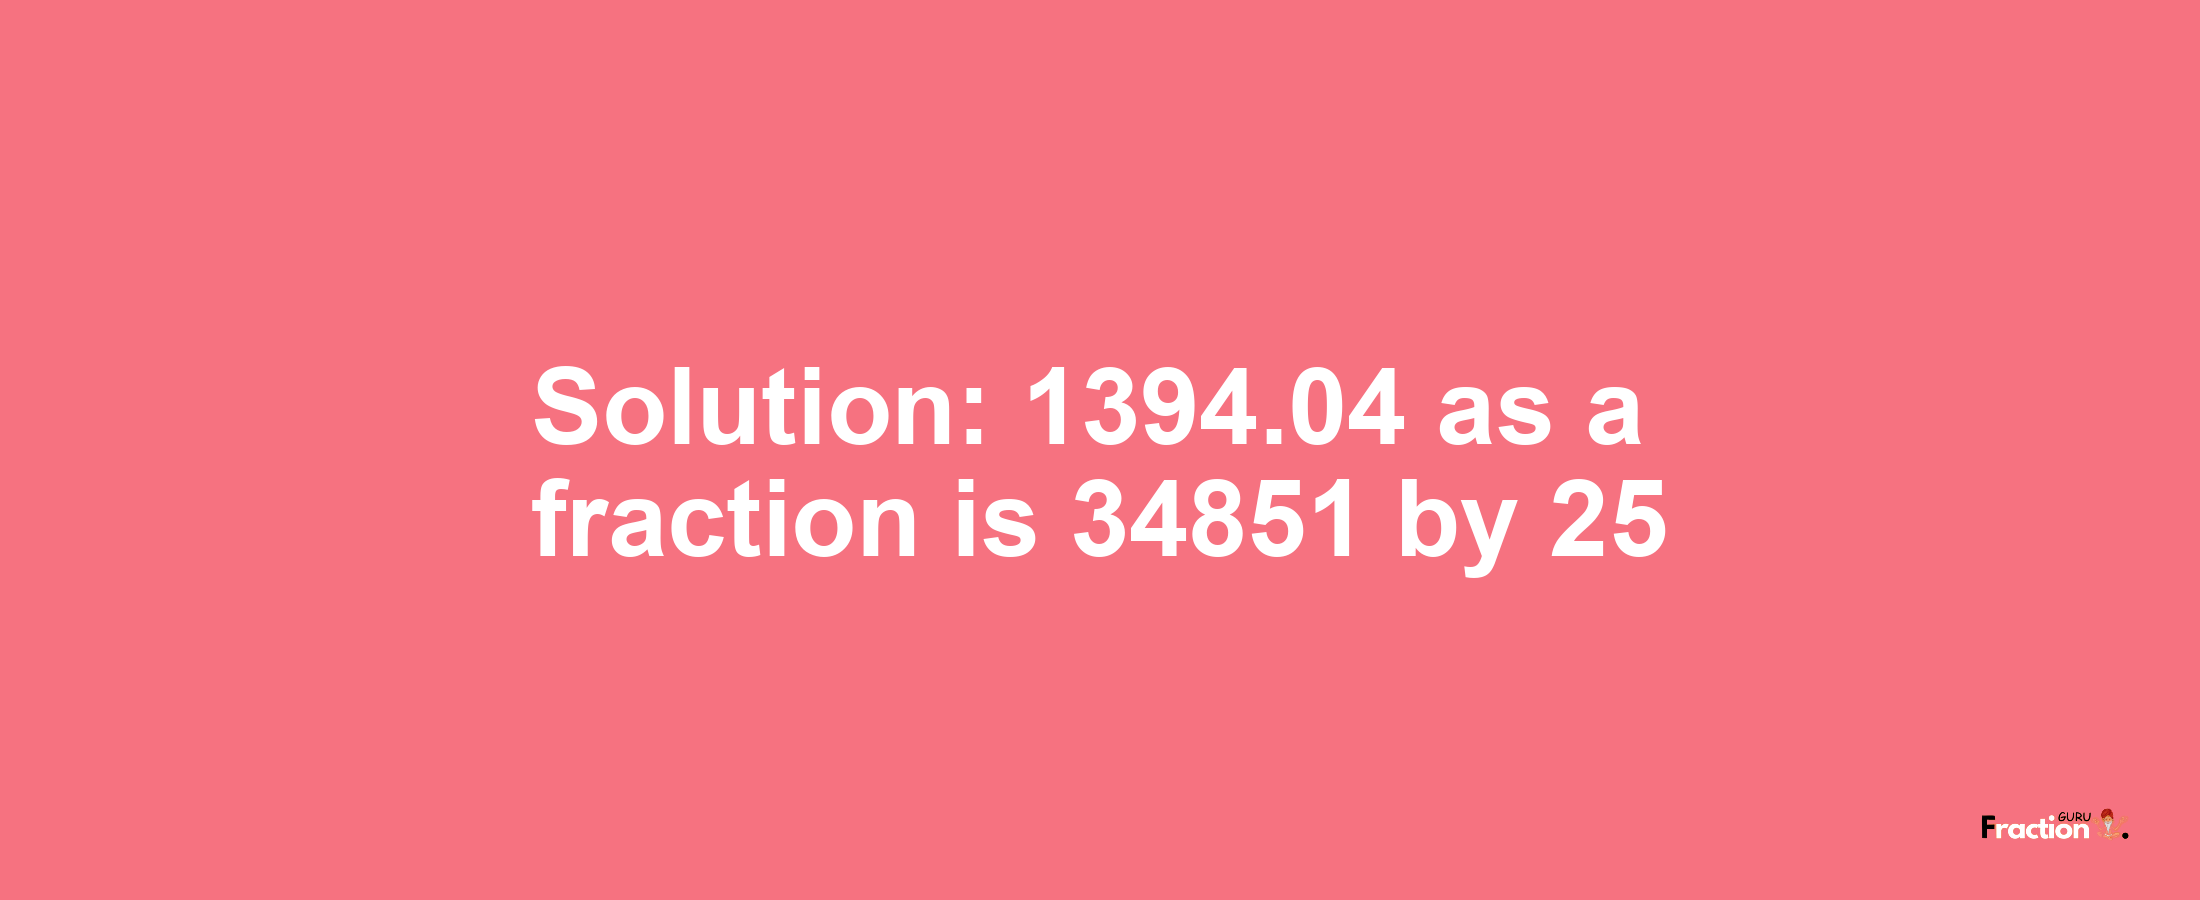 Solution:1394.04 as a fraction is 34851/25